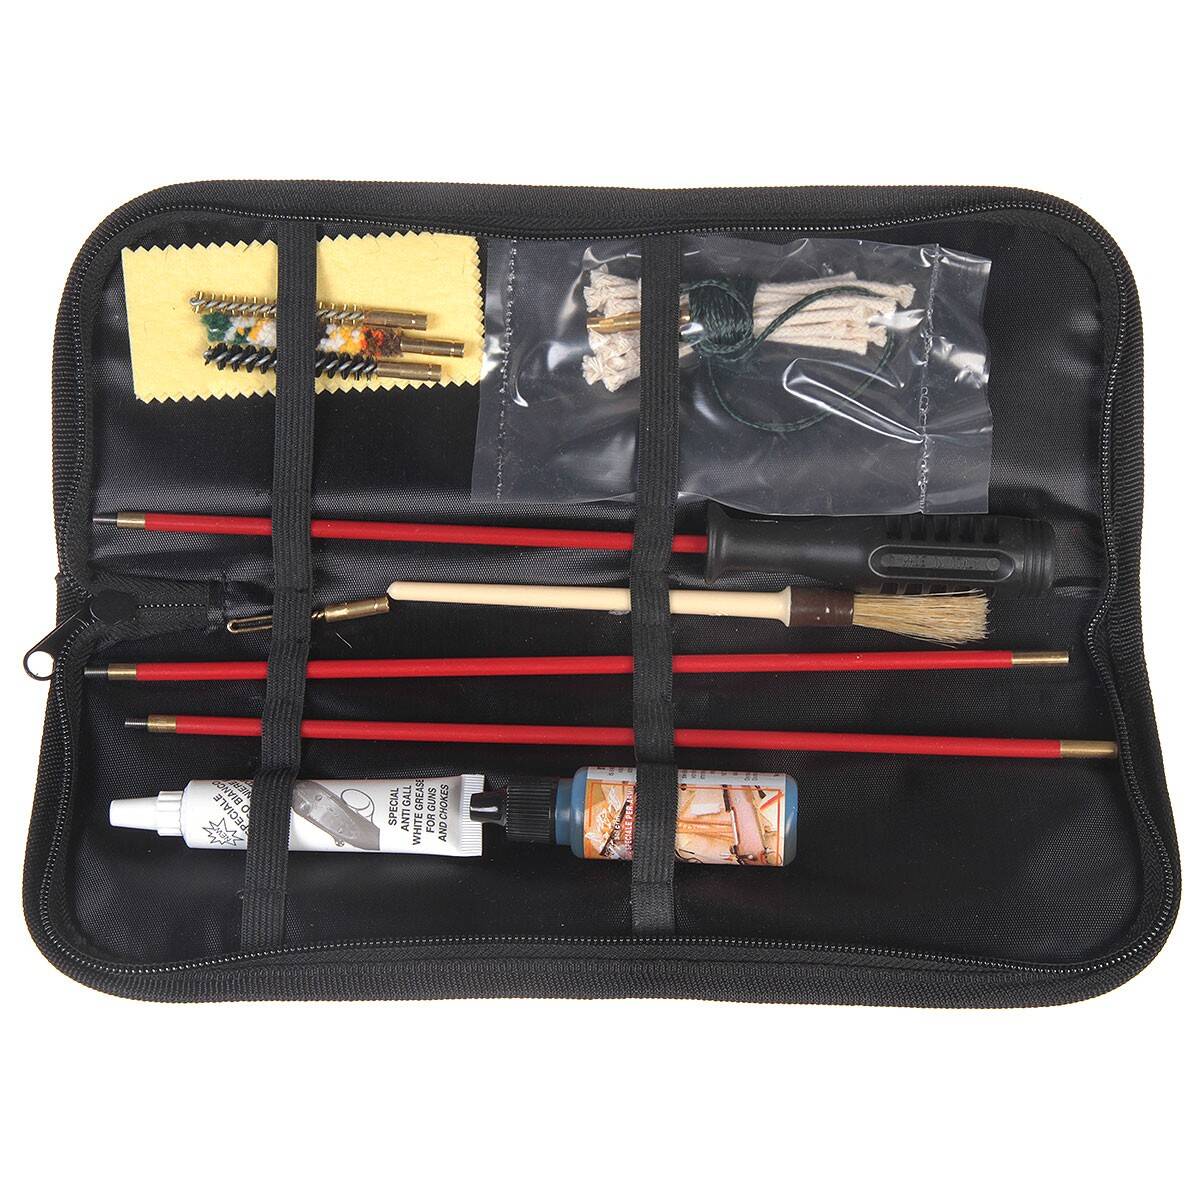 Modular Cleaning Rod Rifle Kit in a Box